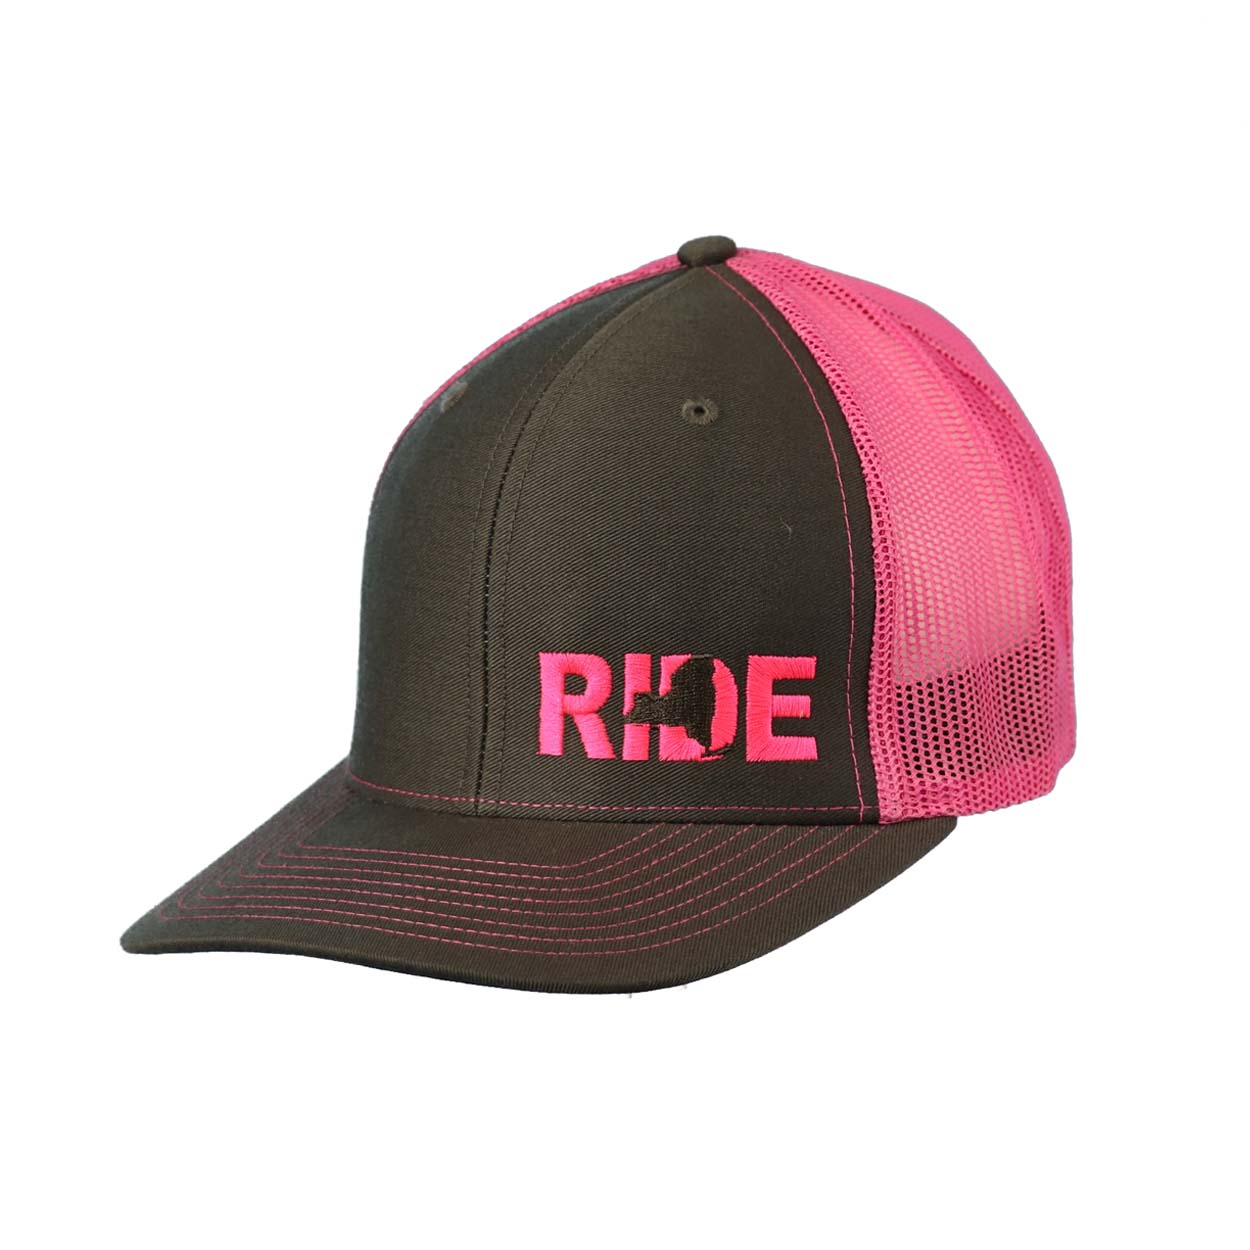 Ride New York Classic Pro Night Out Embroidered Snapback Trucker Hat Gray/Pink